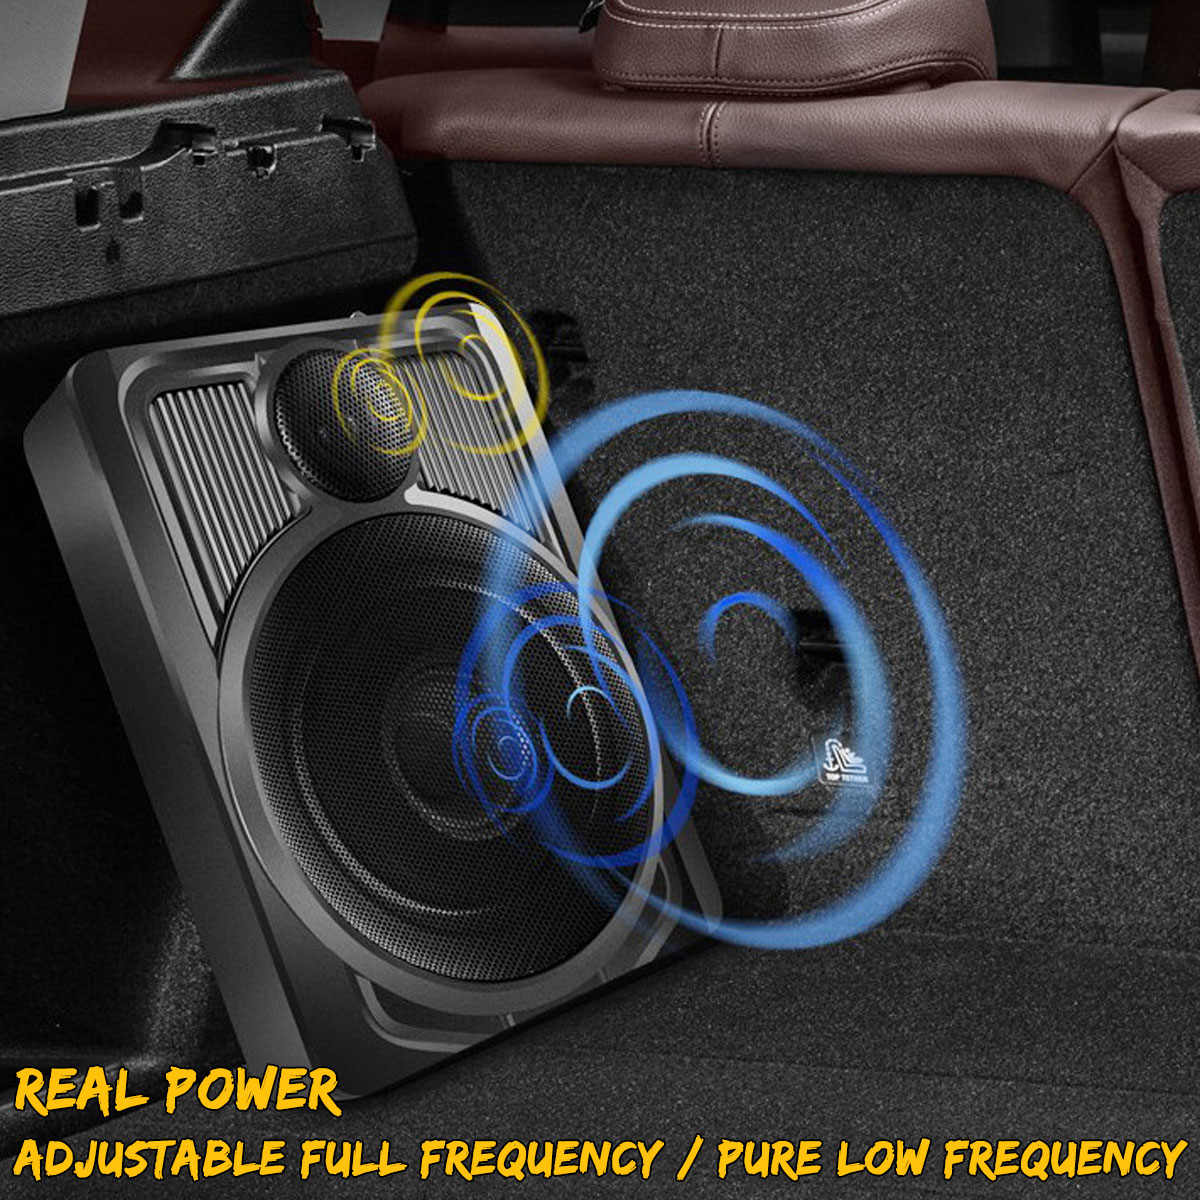 Bakeey-600W-Subwoofer-12V-Car-Ultra-thin-10-inch-With-Tweeter-Subwoofer-Dedicated-Full-range-Subwoof-1746877-6